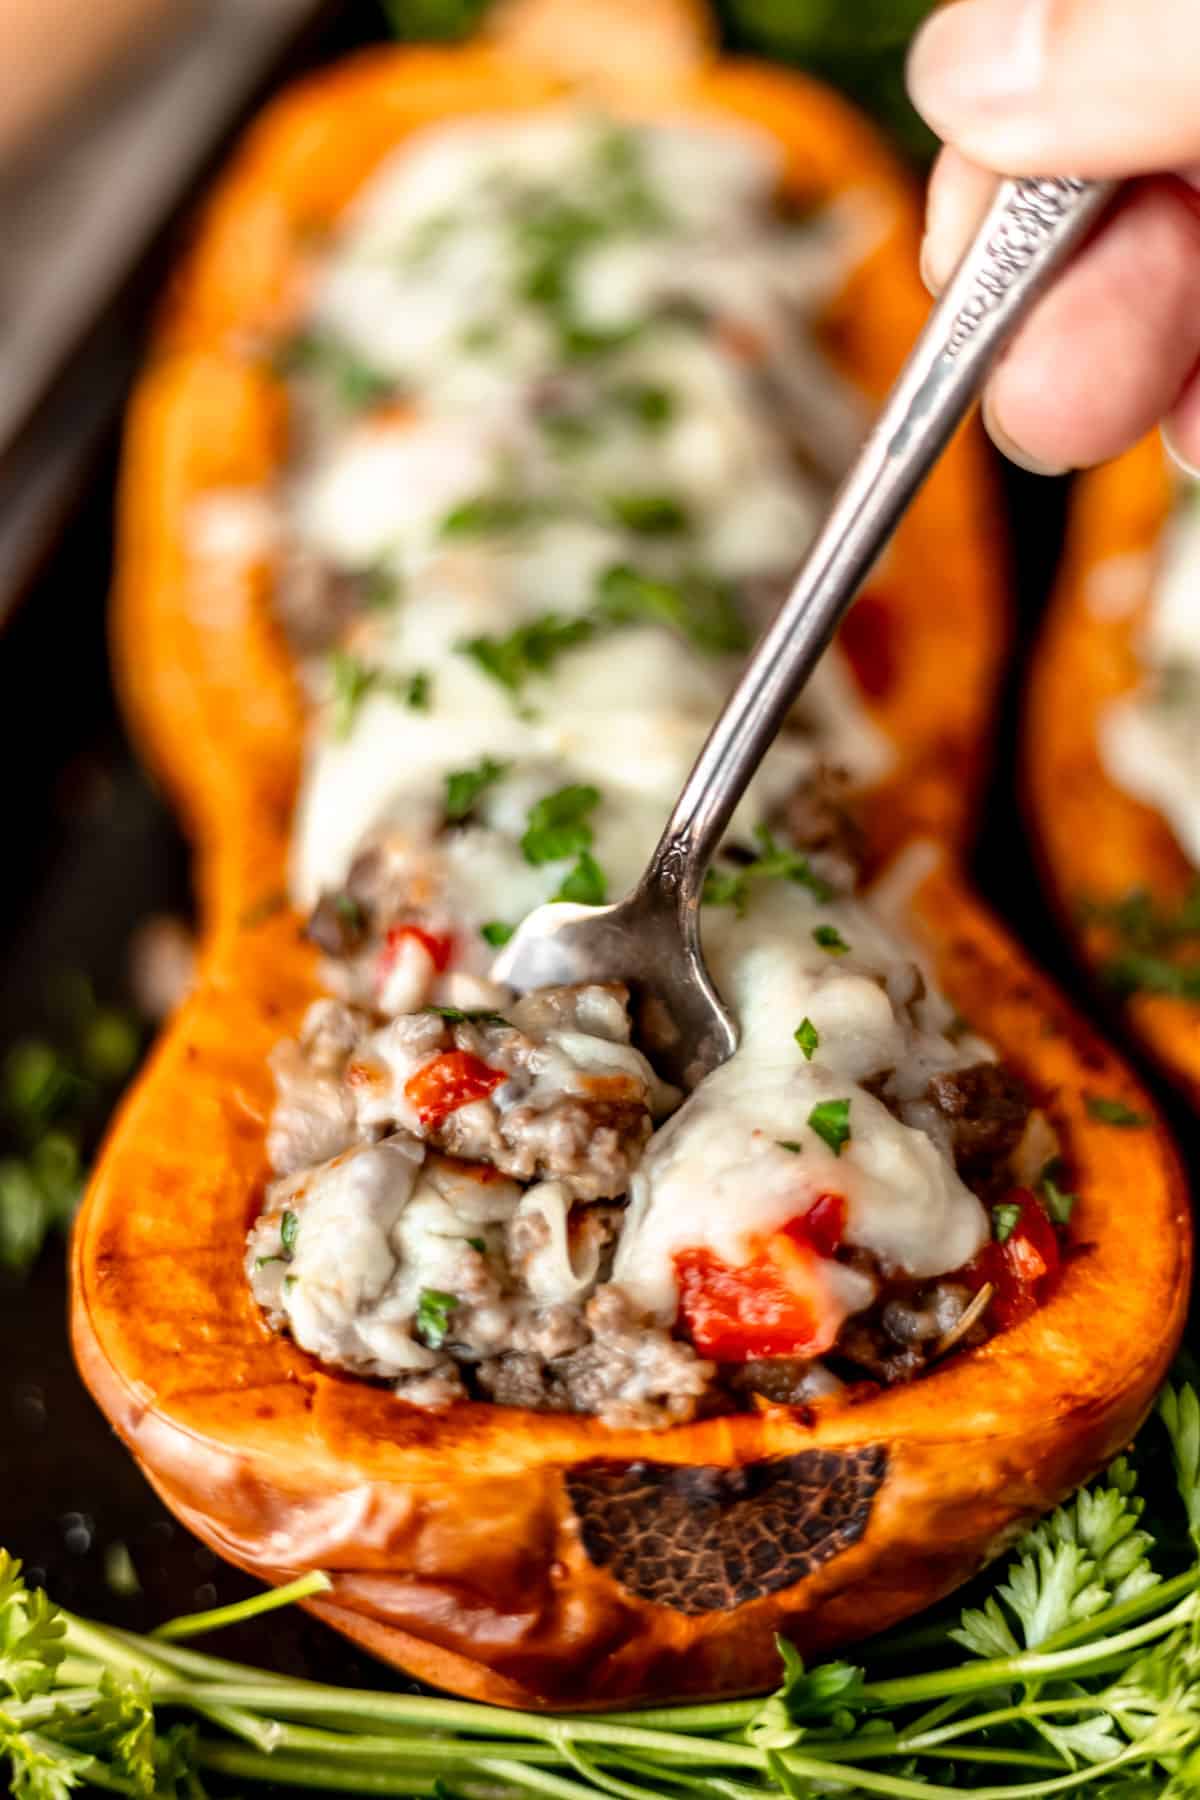 Close up of a stuffed butternut squash with a fork in it lifting some of the filling up.